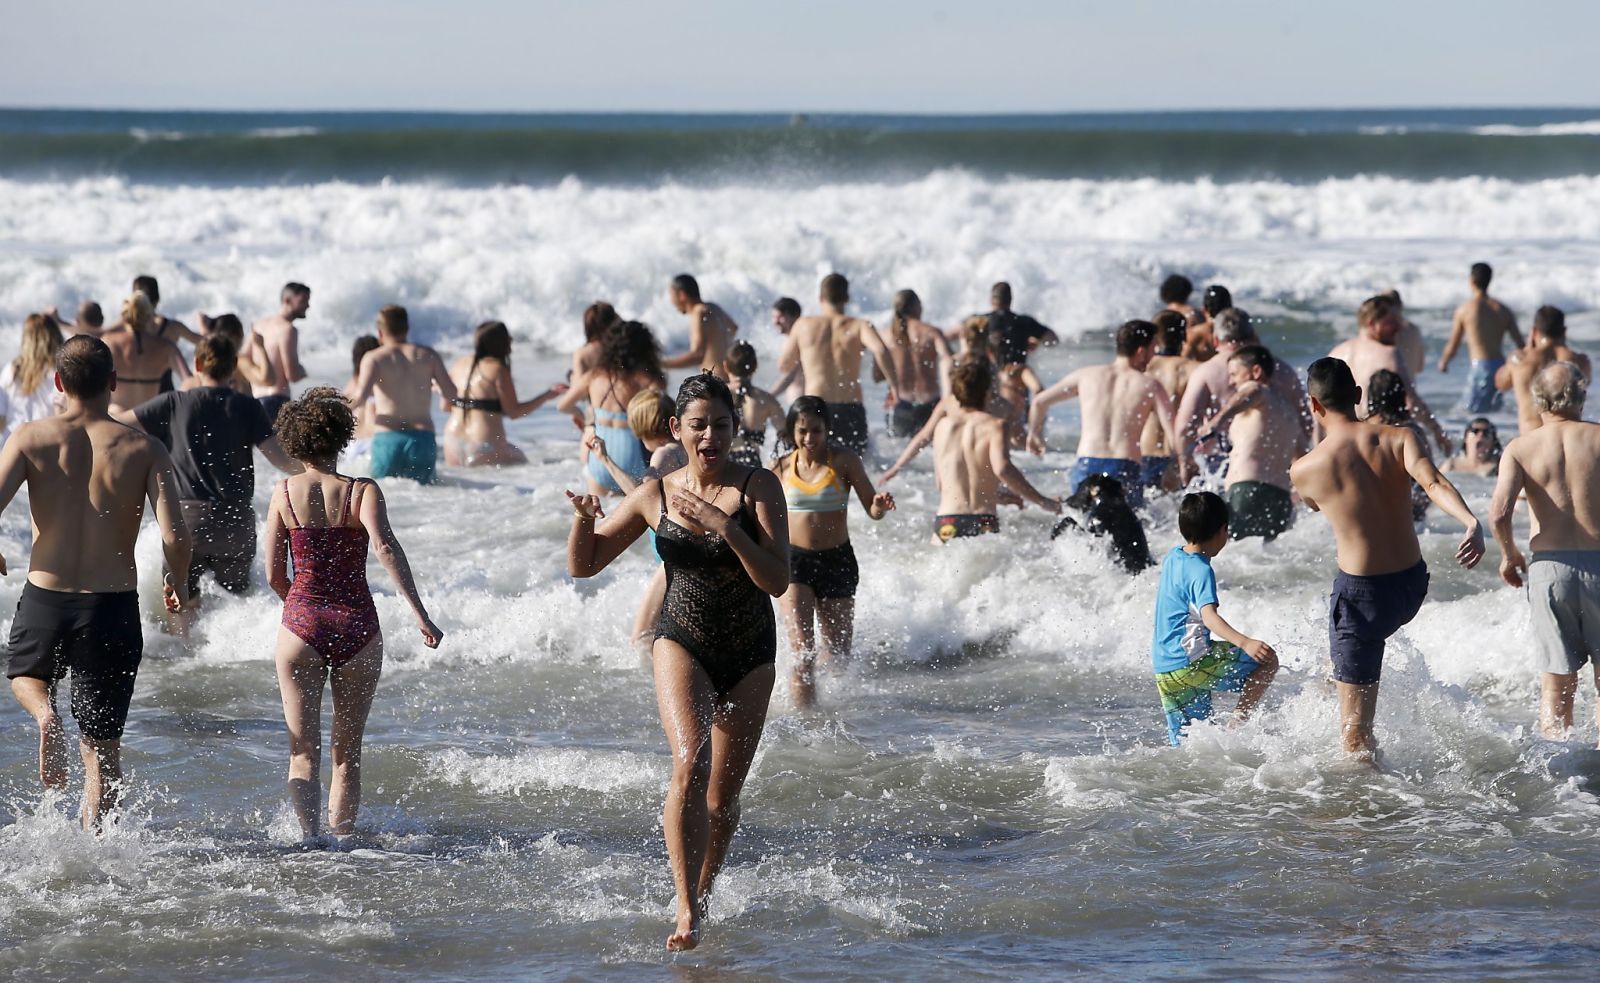 alb magroh recommends naked polar bear plunge pic